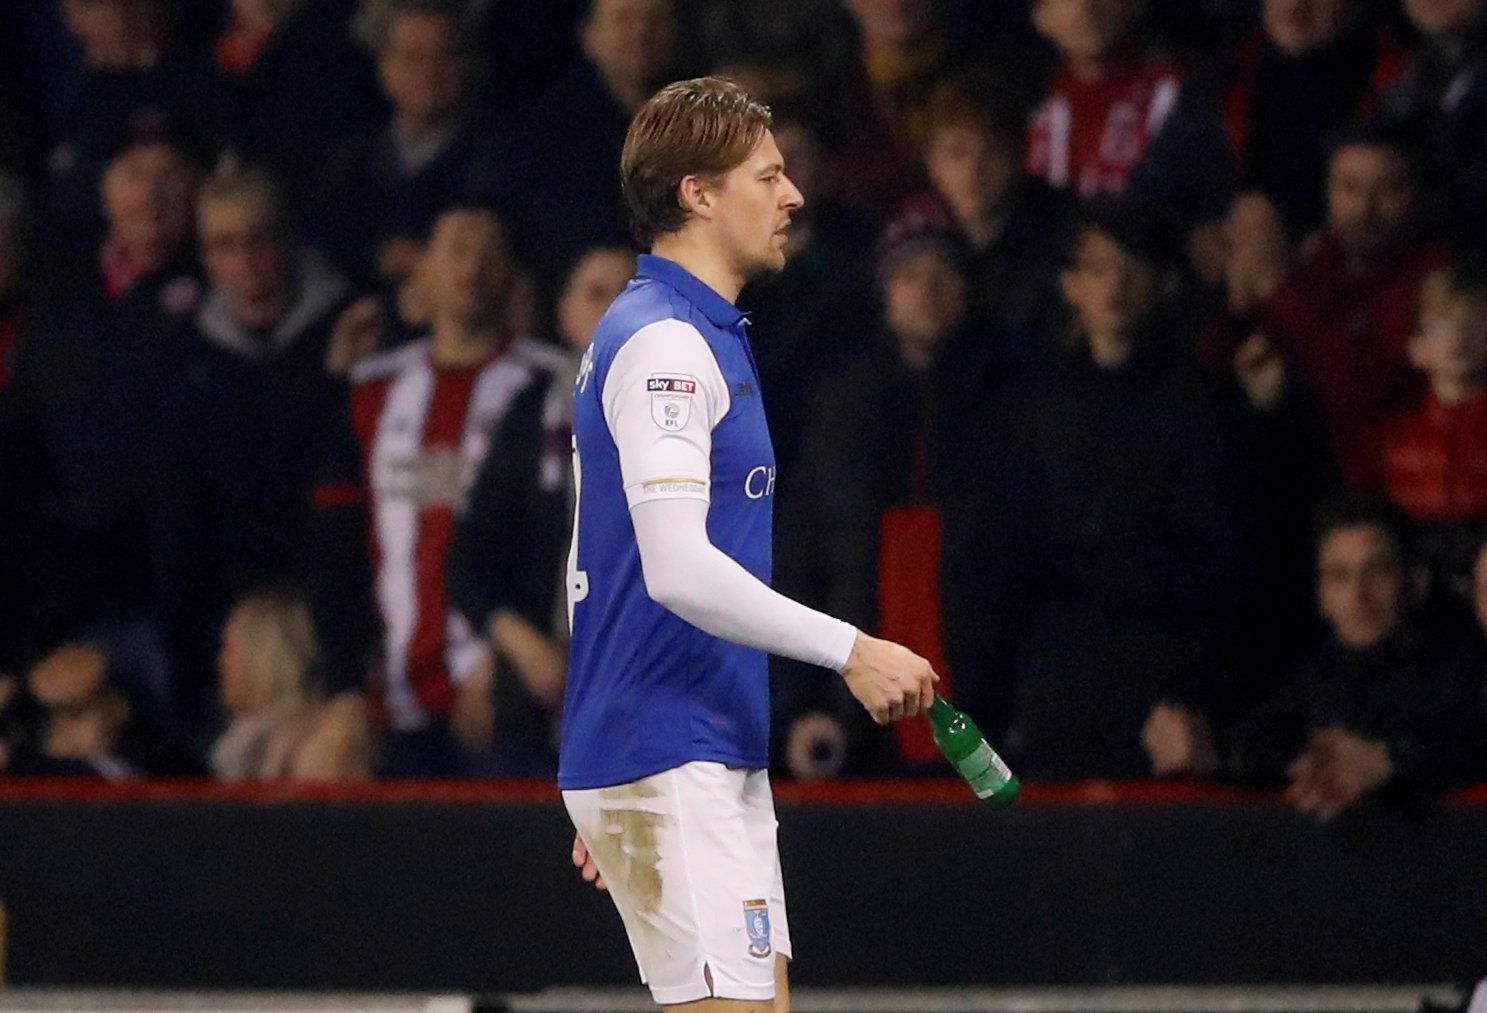 Soccer Football - Championship - Sheffield United vs Sheffield Wednesday - Bramall Lane, Sheffield, Britain - January 12, 2018   Sheffield Wednesday's Glenn Loovens holds a bottle that was thrown onto the pitch after being sent off         Action Images/Carl Recine    EDITORIAL USE ONLY. No use with unauthorized audio, video, data, fixture lists, club/league logos or 